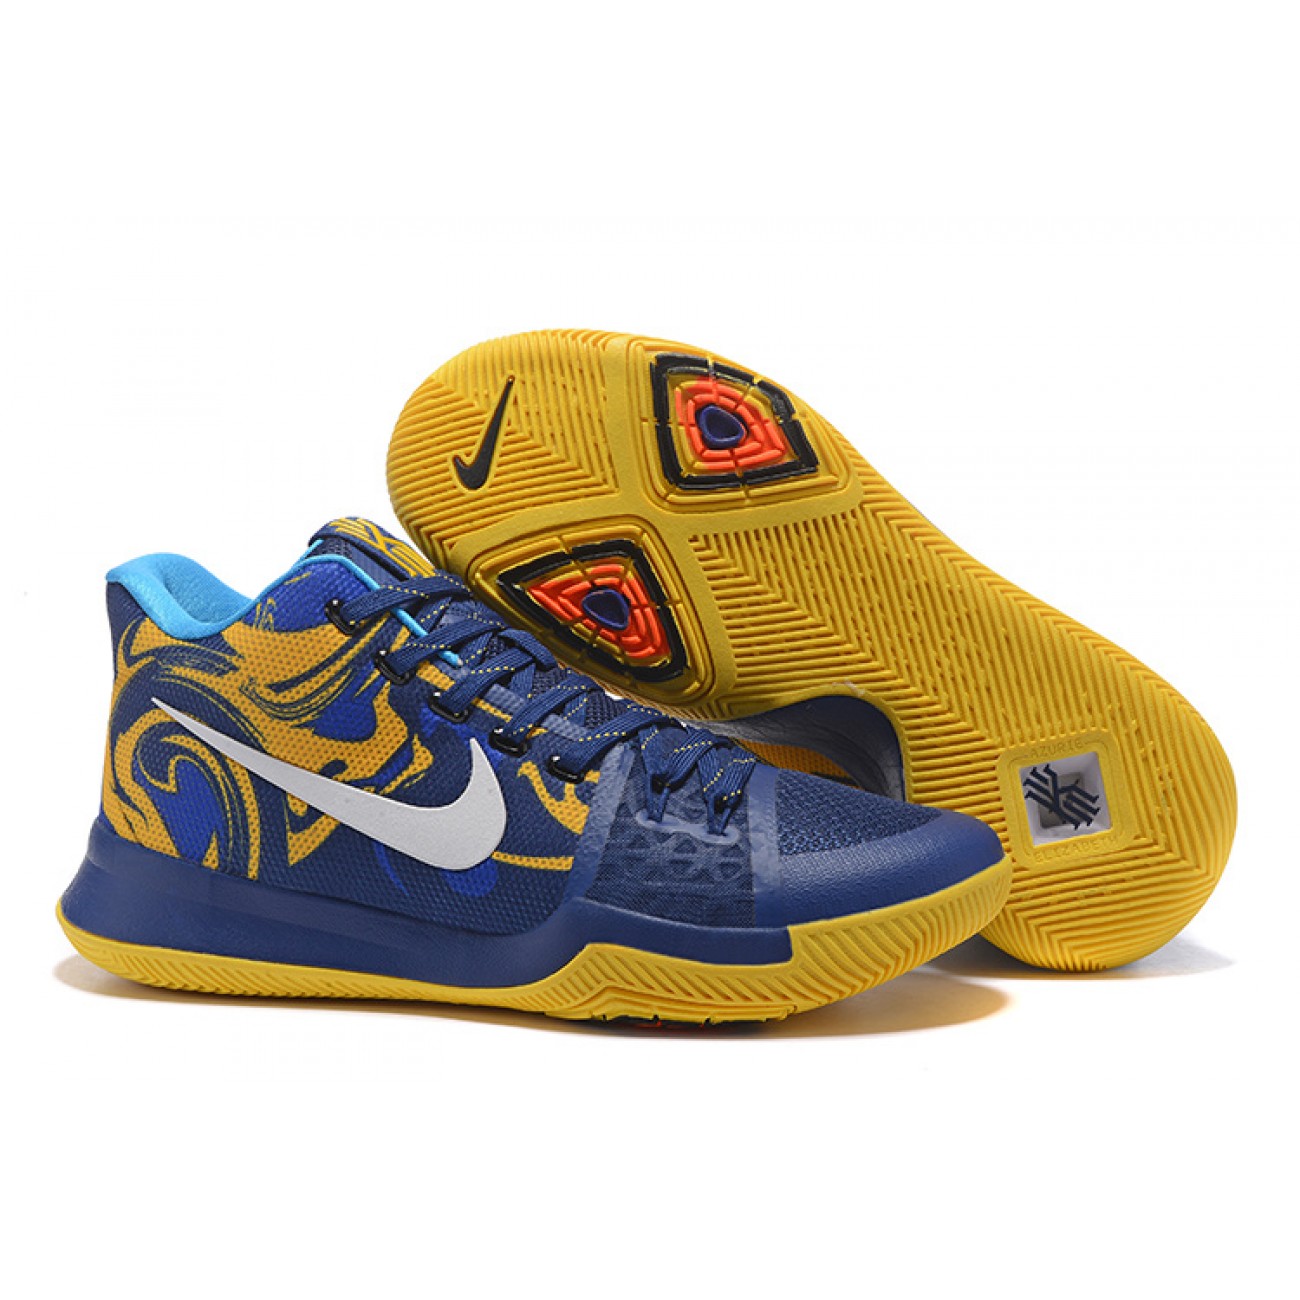 Kyrie 3 "Five Champion" Blue/Yellow